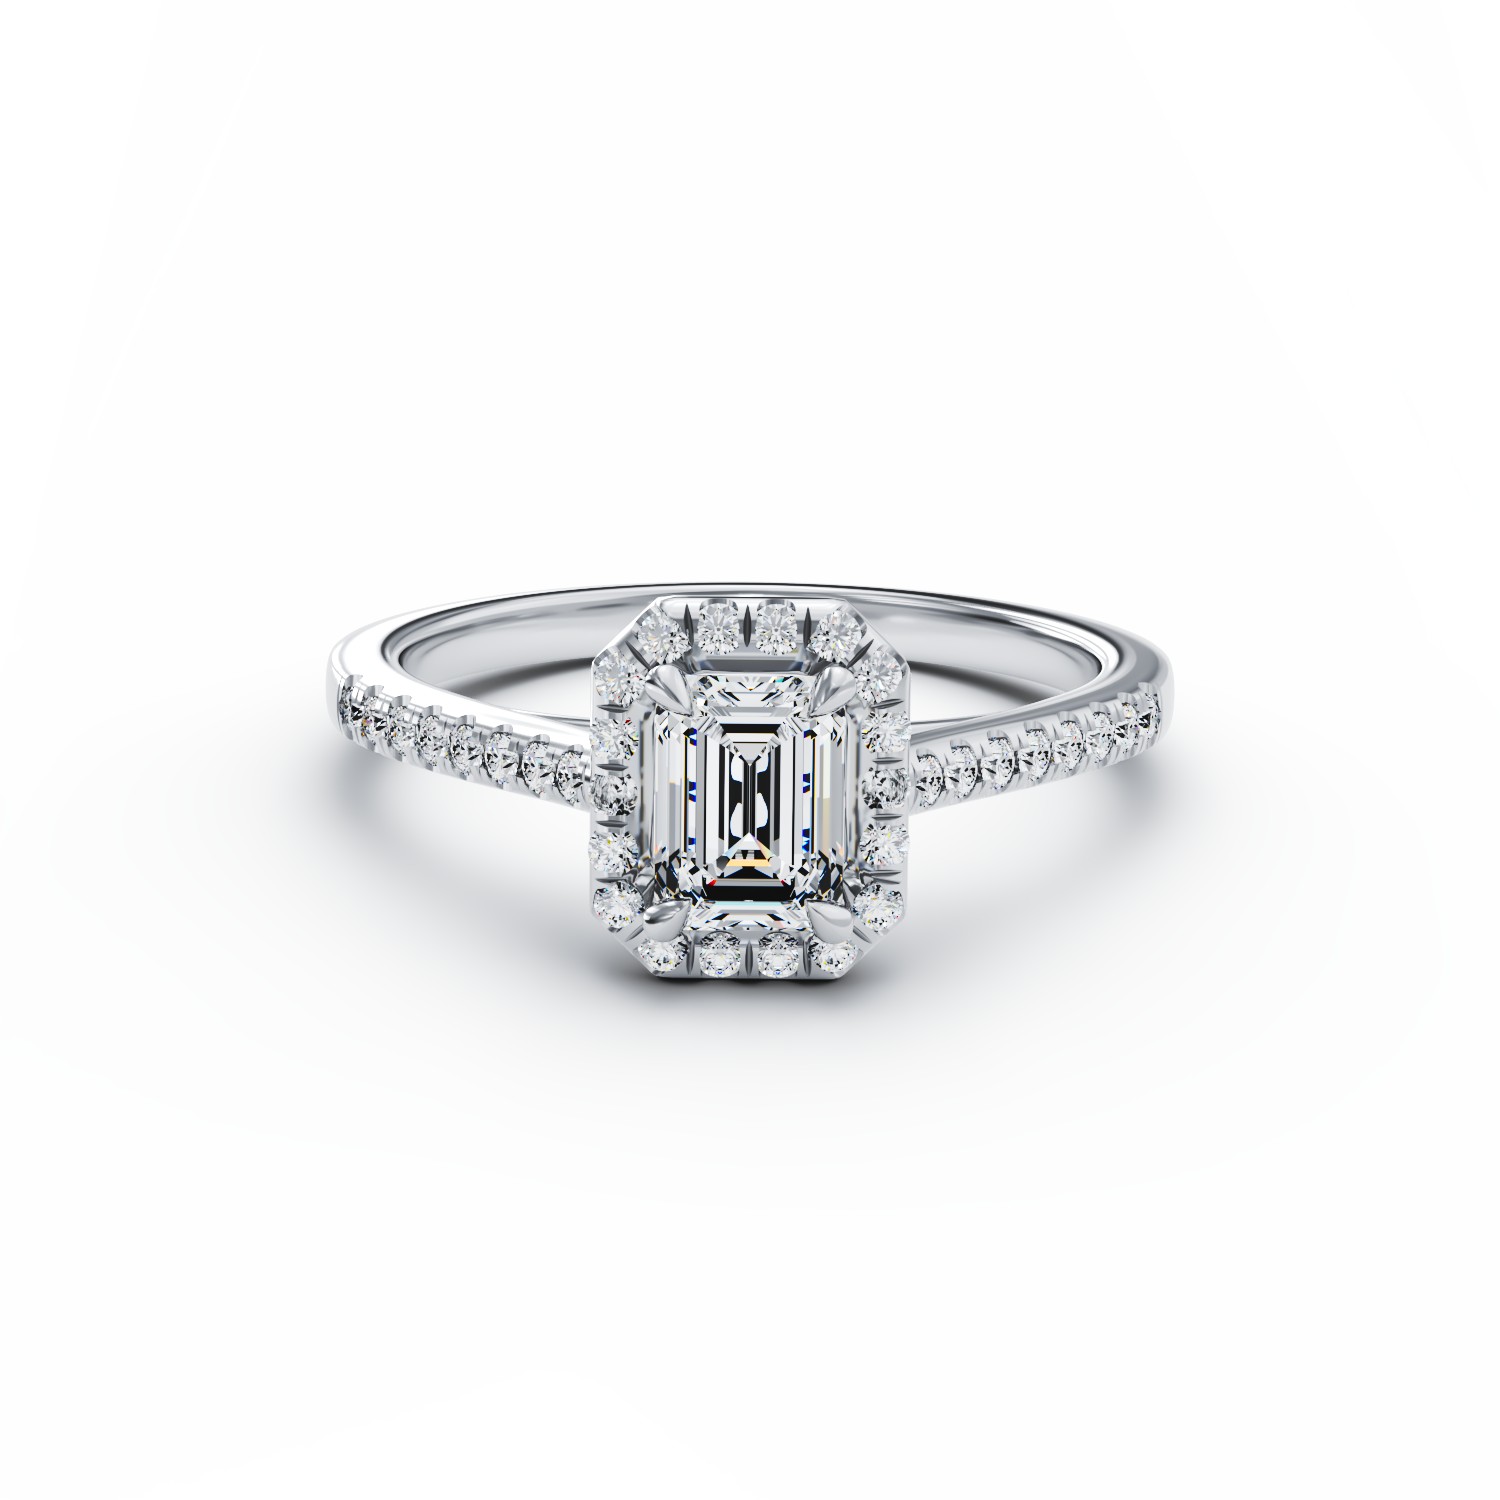 18K white gold engagement ring with 0.8ct diamond and 0.25ct diamonds